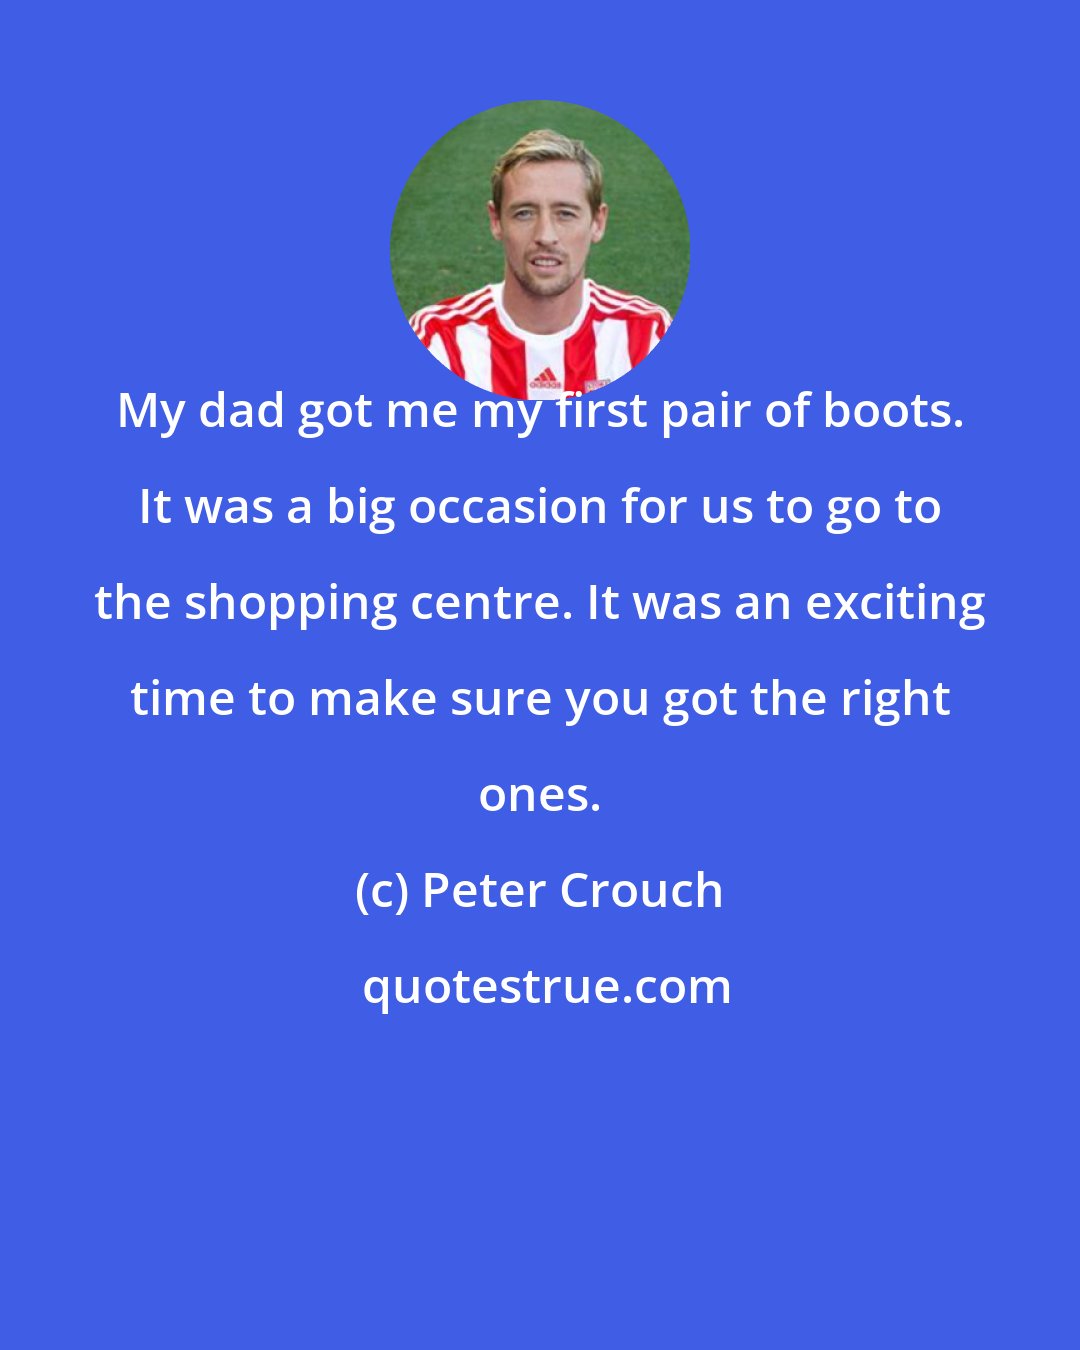 Peter Crouch: My dad got me my first pair of boots. It was a big occasion for us to go to the shopping centre. It was an exciting time to make sure you got the right ones.